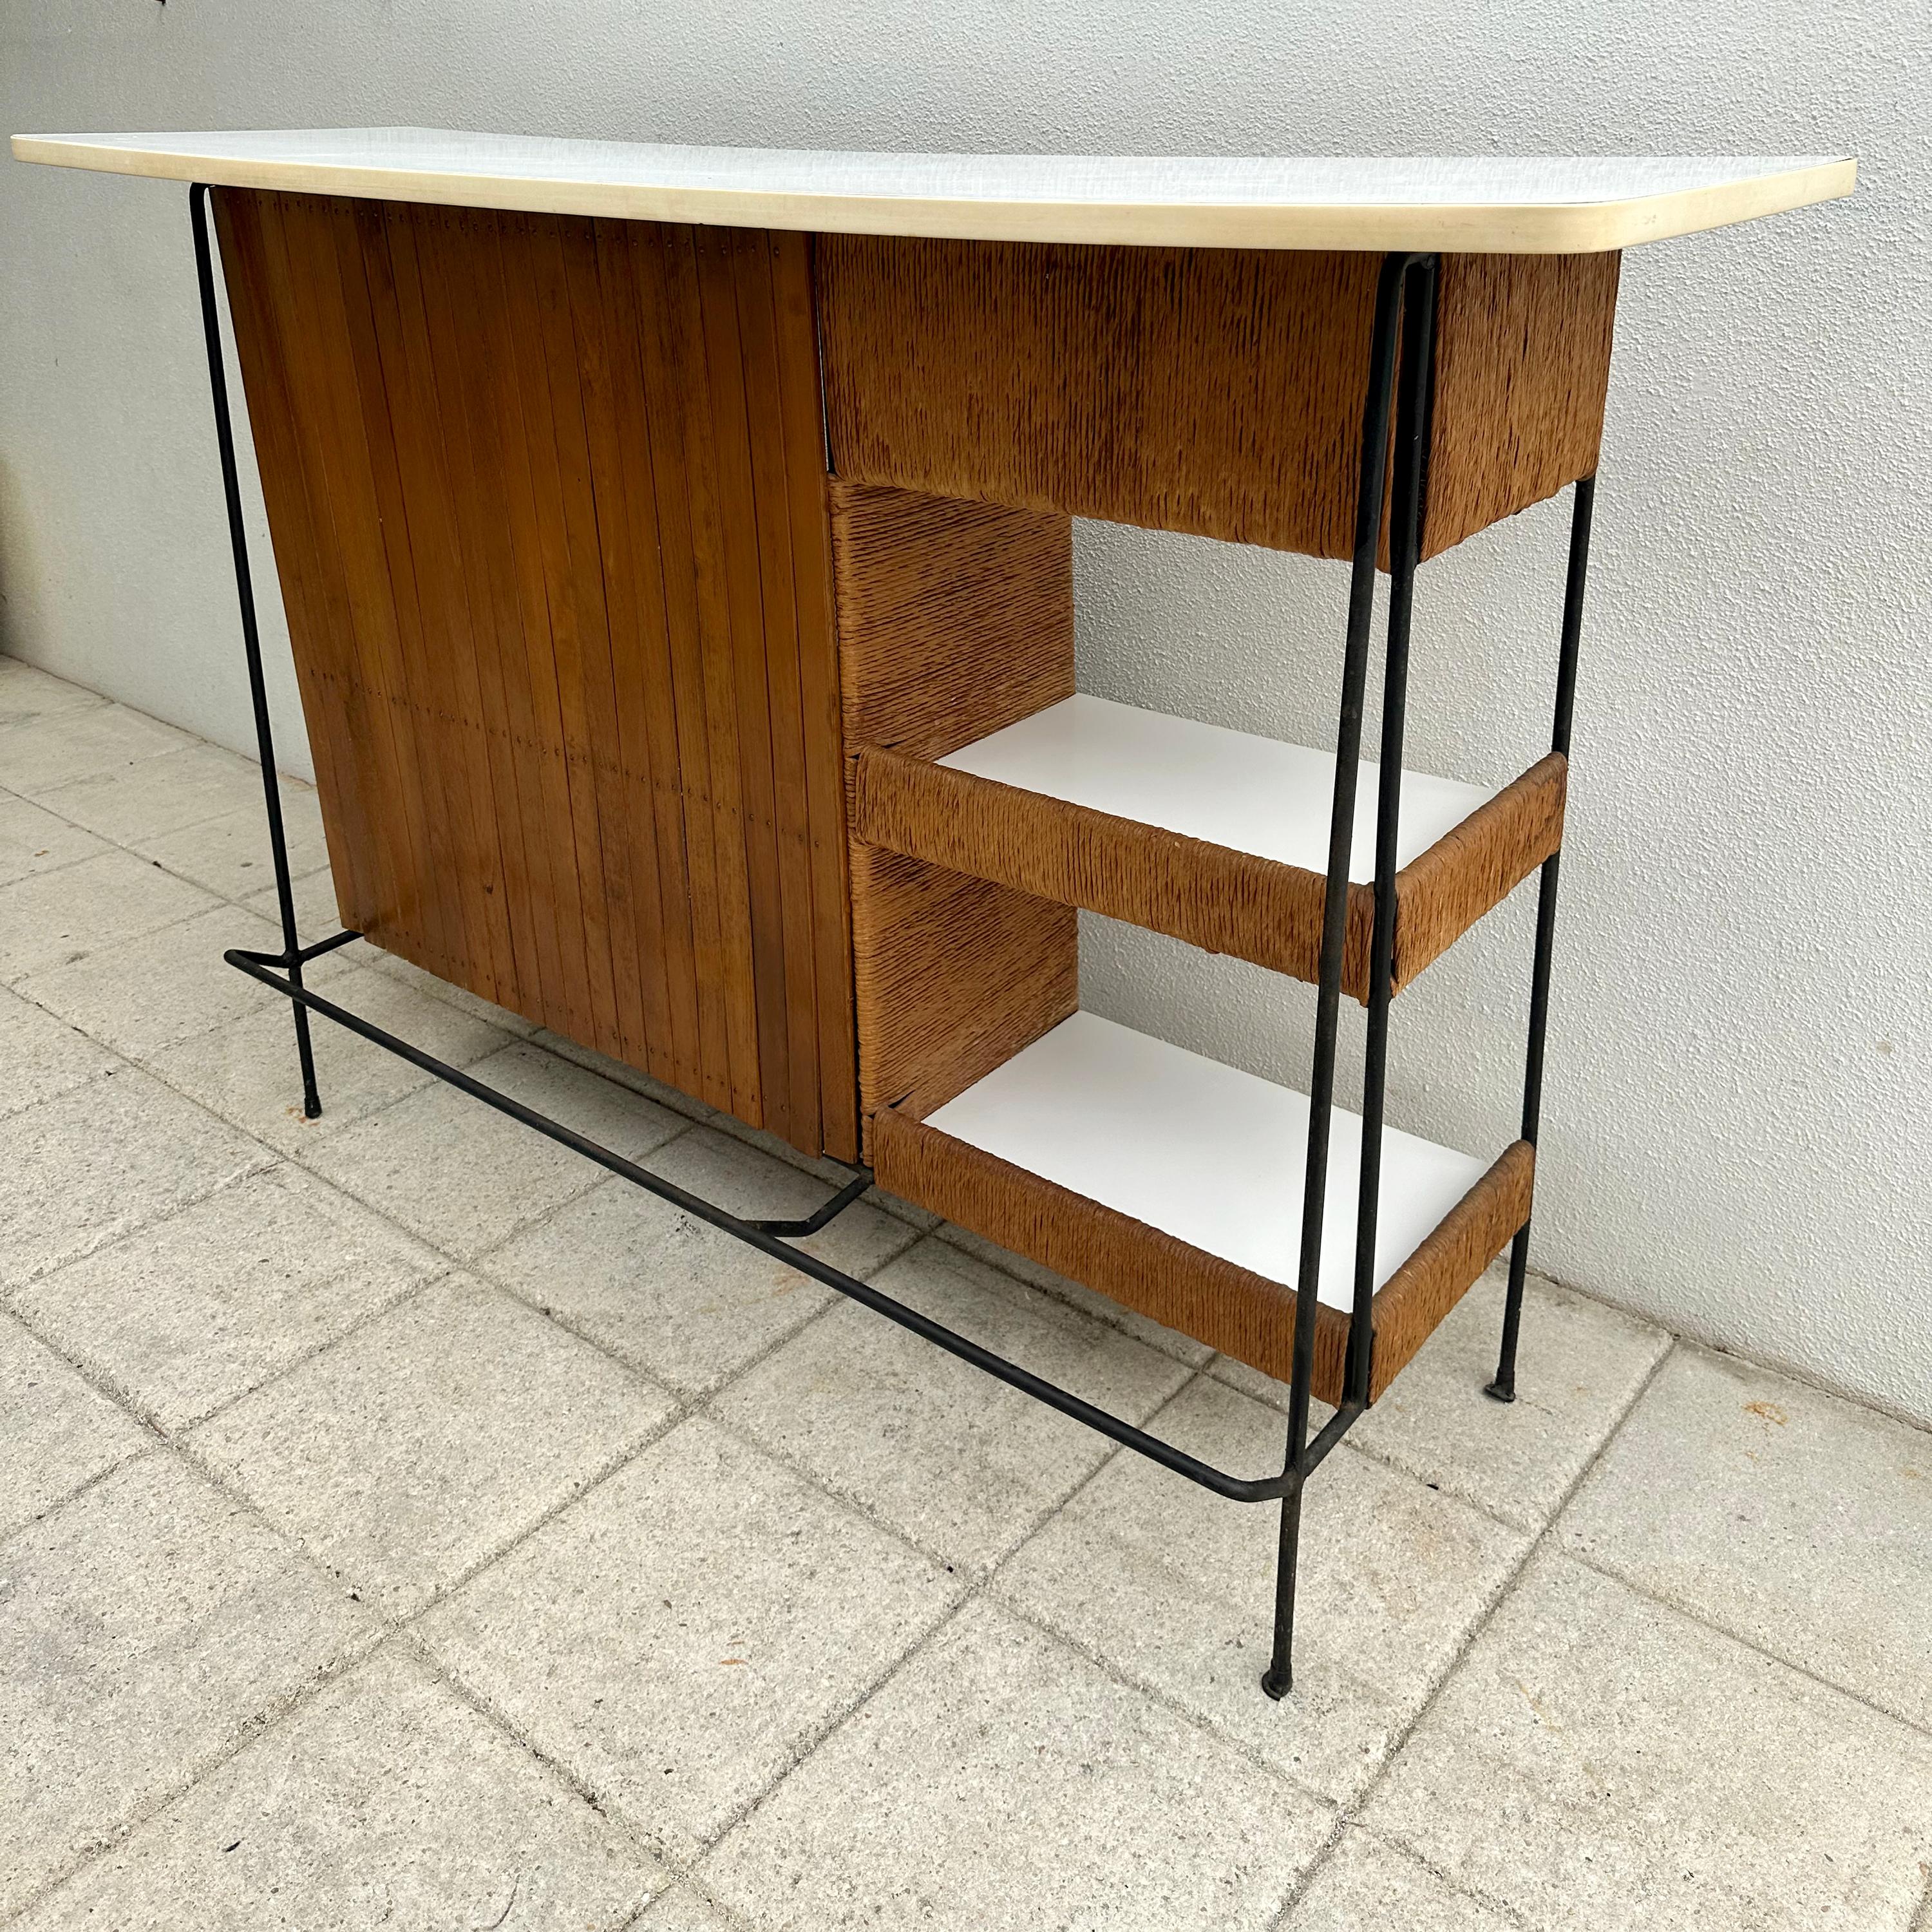 Vintage 1950s-60s wood slat, rope and wrought iron bar. Features white laminate top with multiple shelves in the back and side. Vintage condition, slight curvature to the top, shows some wear throughout and white rubber edging is missing a few bits